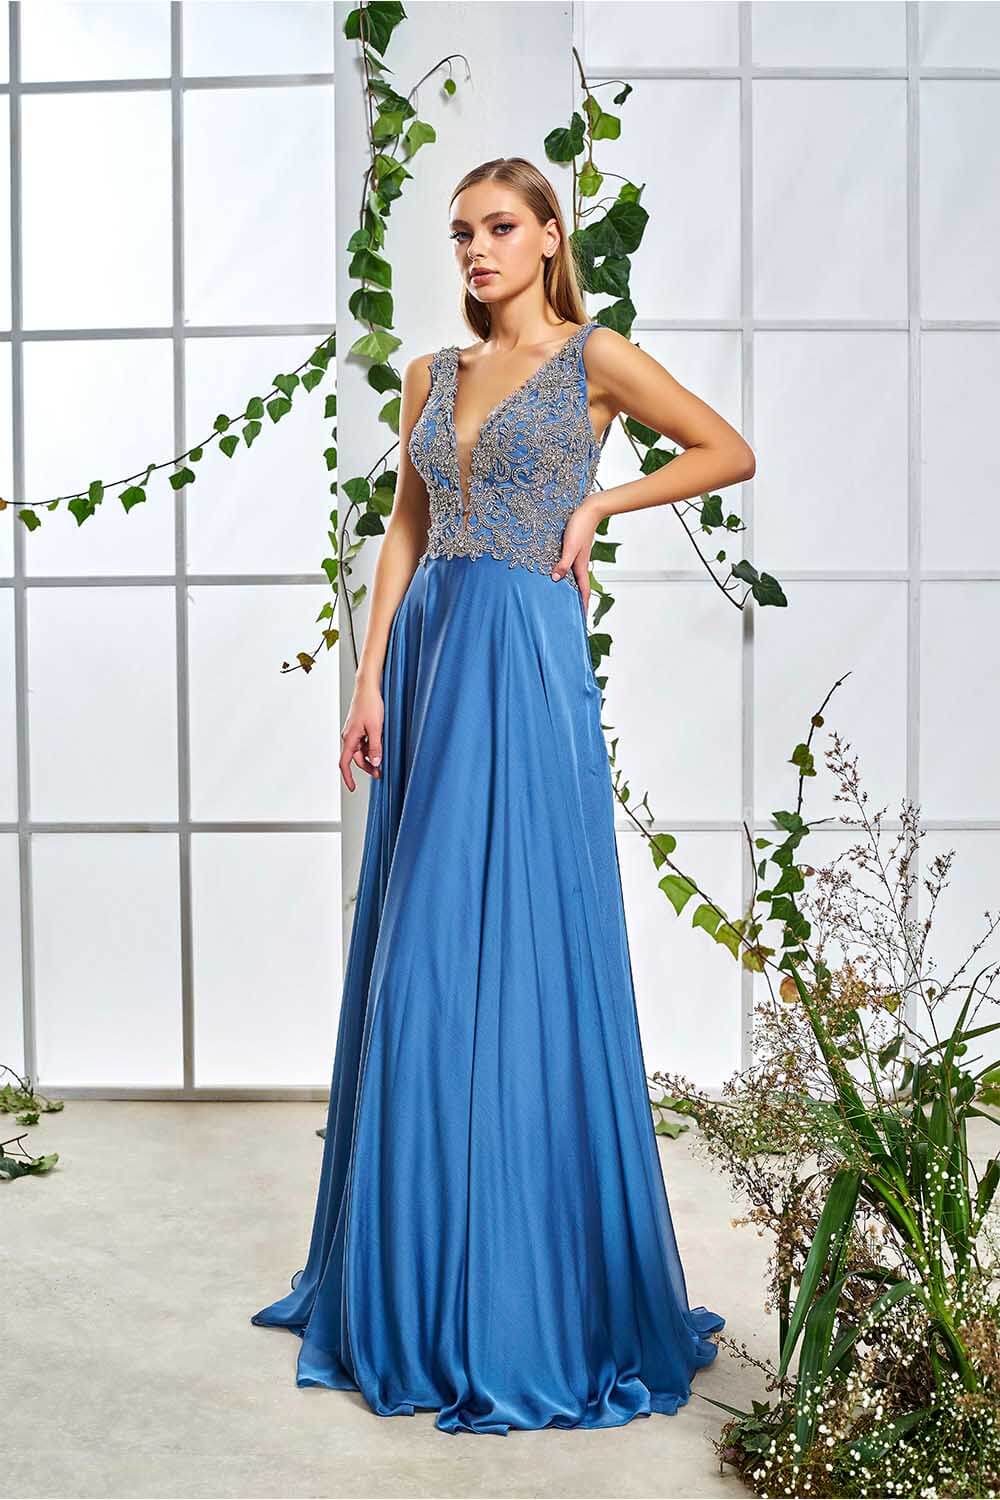 Stone Embroidered Blue Long Satin Evening Dress